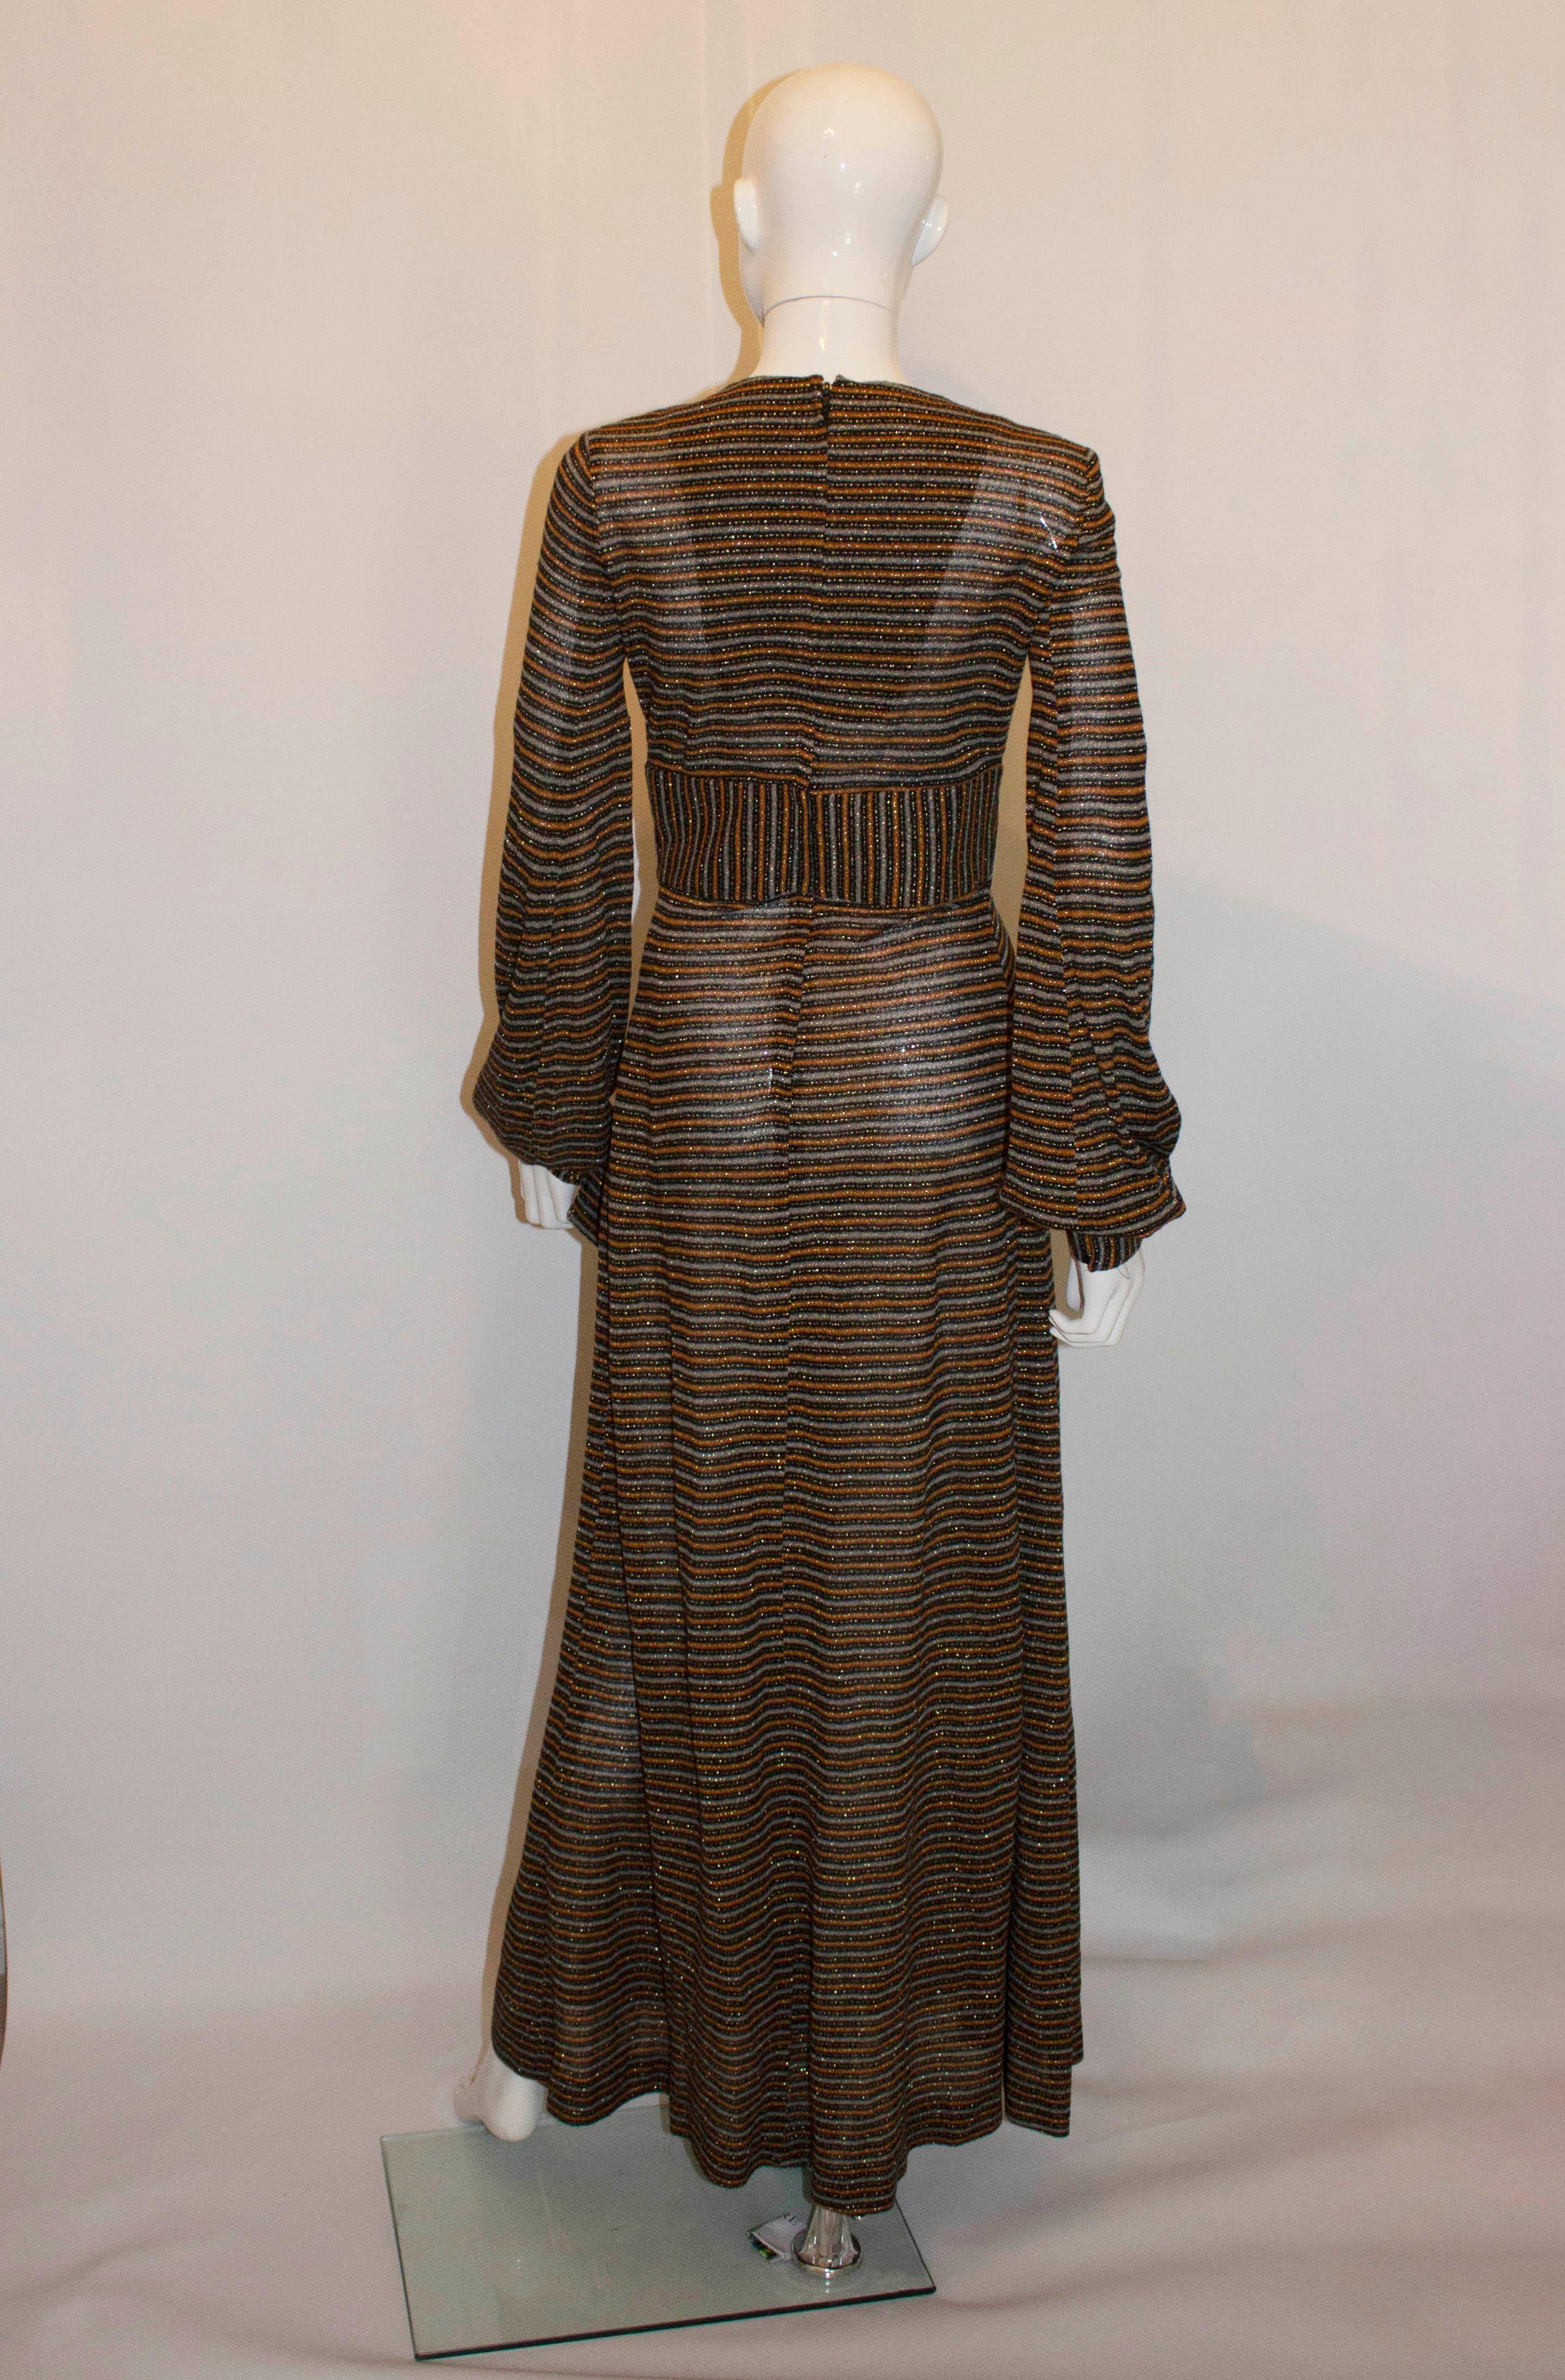 A head turning vintage gown by Laura Lee London.  In a mix of grey ,brown and black stripe with gold running through, the dress has a v neckline. gold detail and pleats at the front , a central back zip and popper cuffs.
Measurements Bust 35'', 